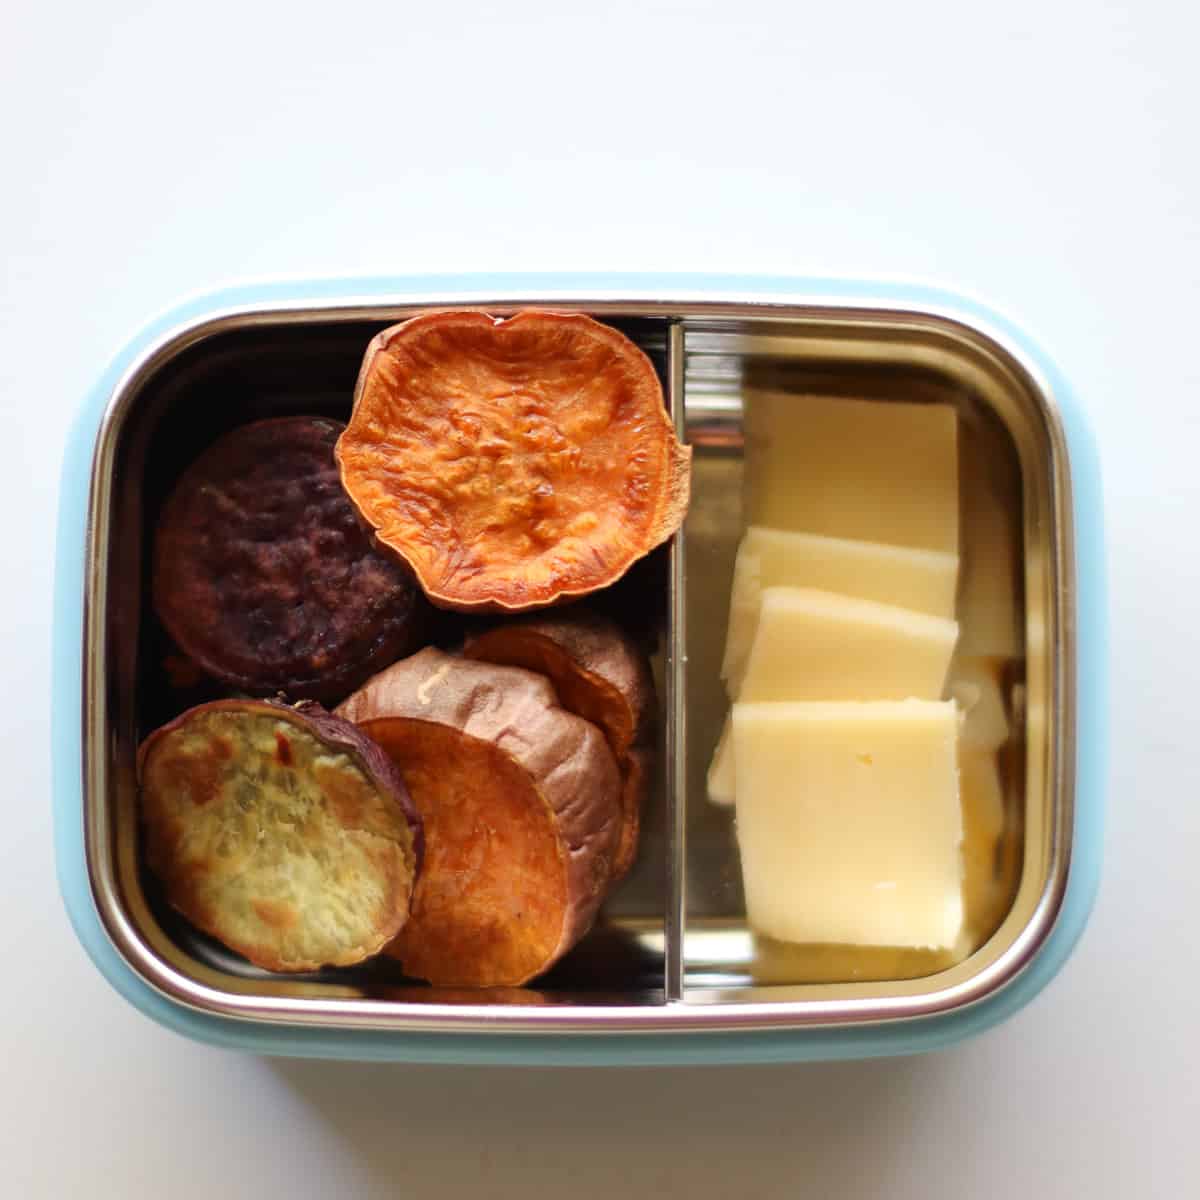 Sweet potatoes and cheese in a stainless steel snack container.